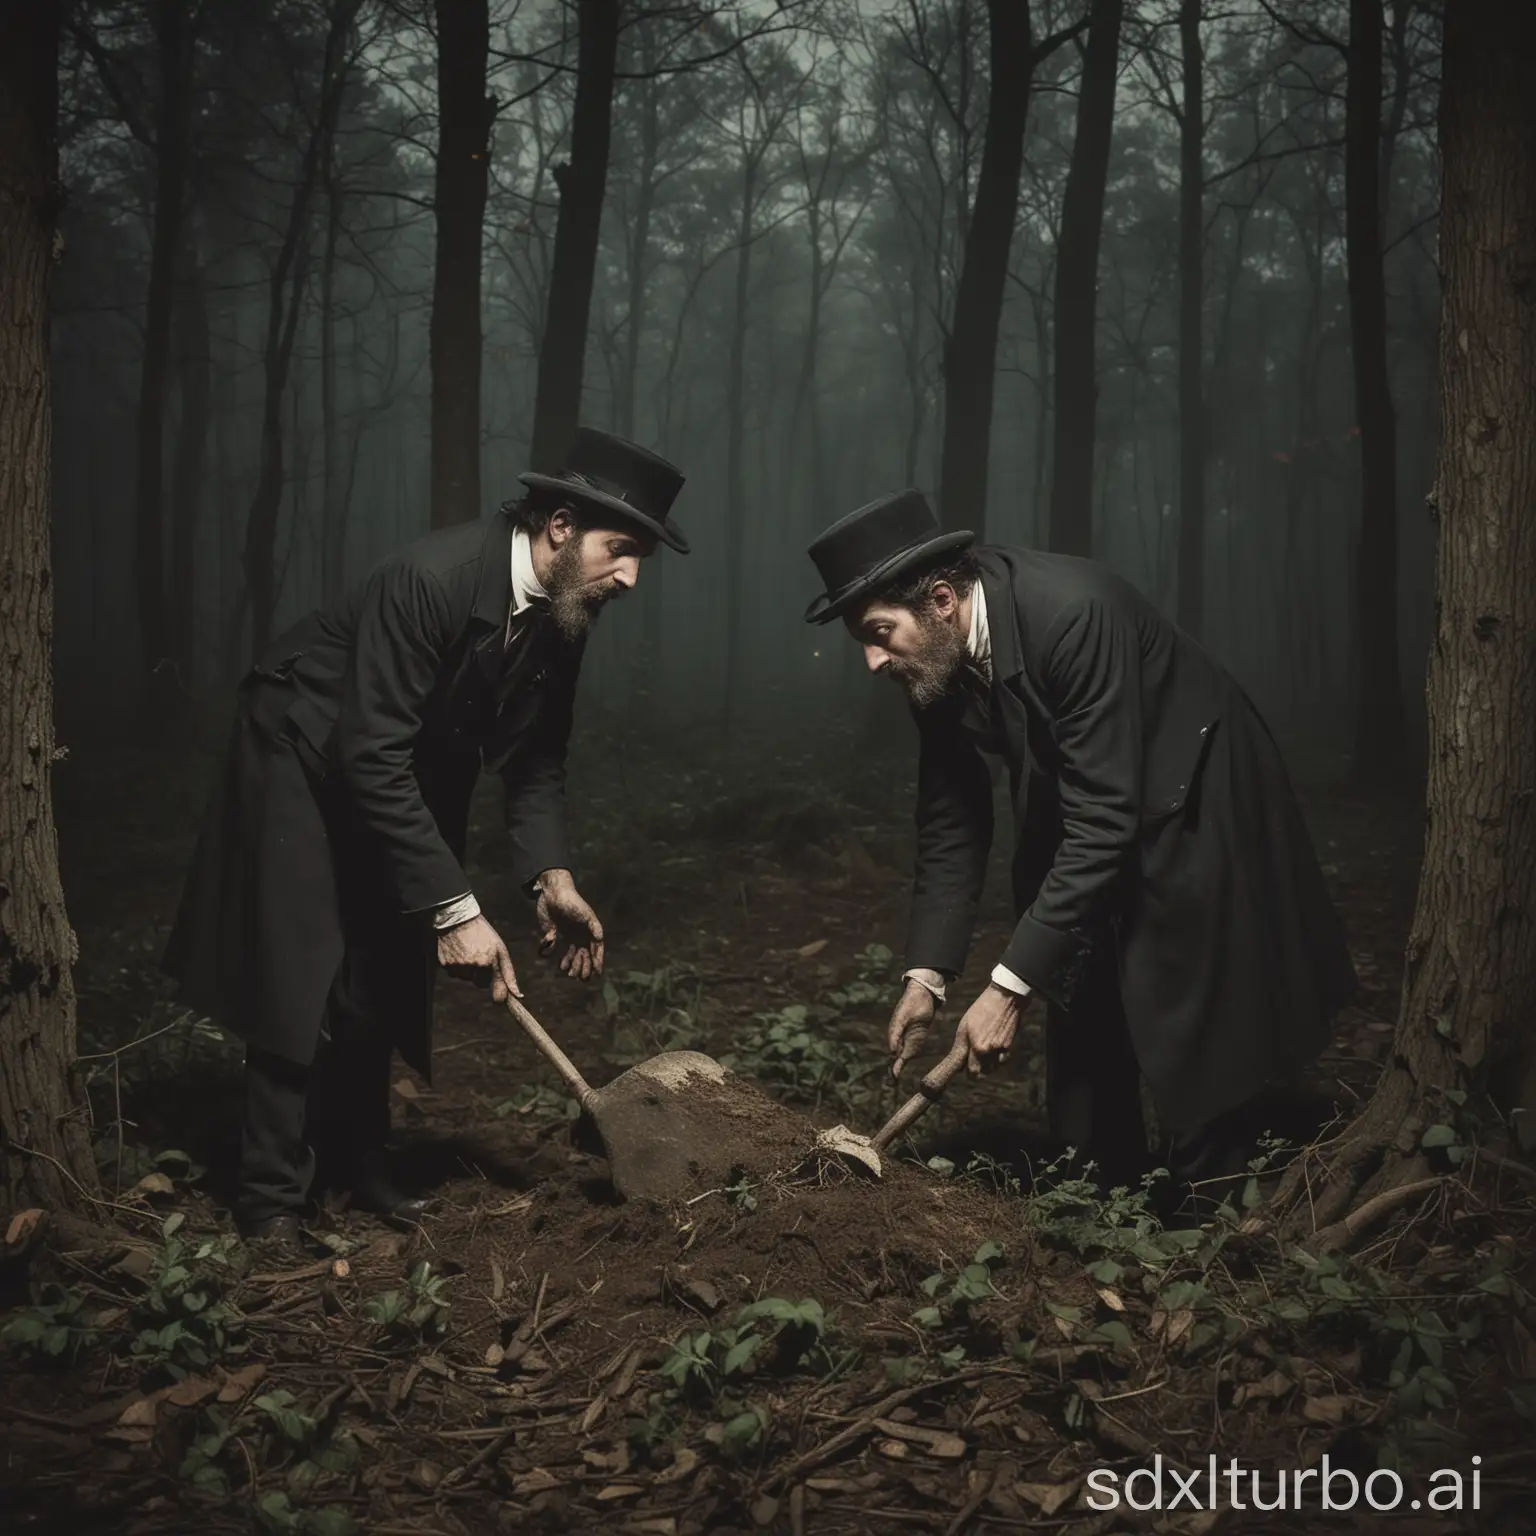 Two Victorian men burying something in a forest at night.